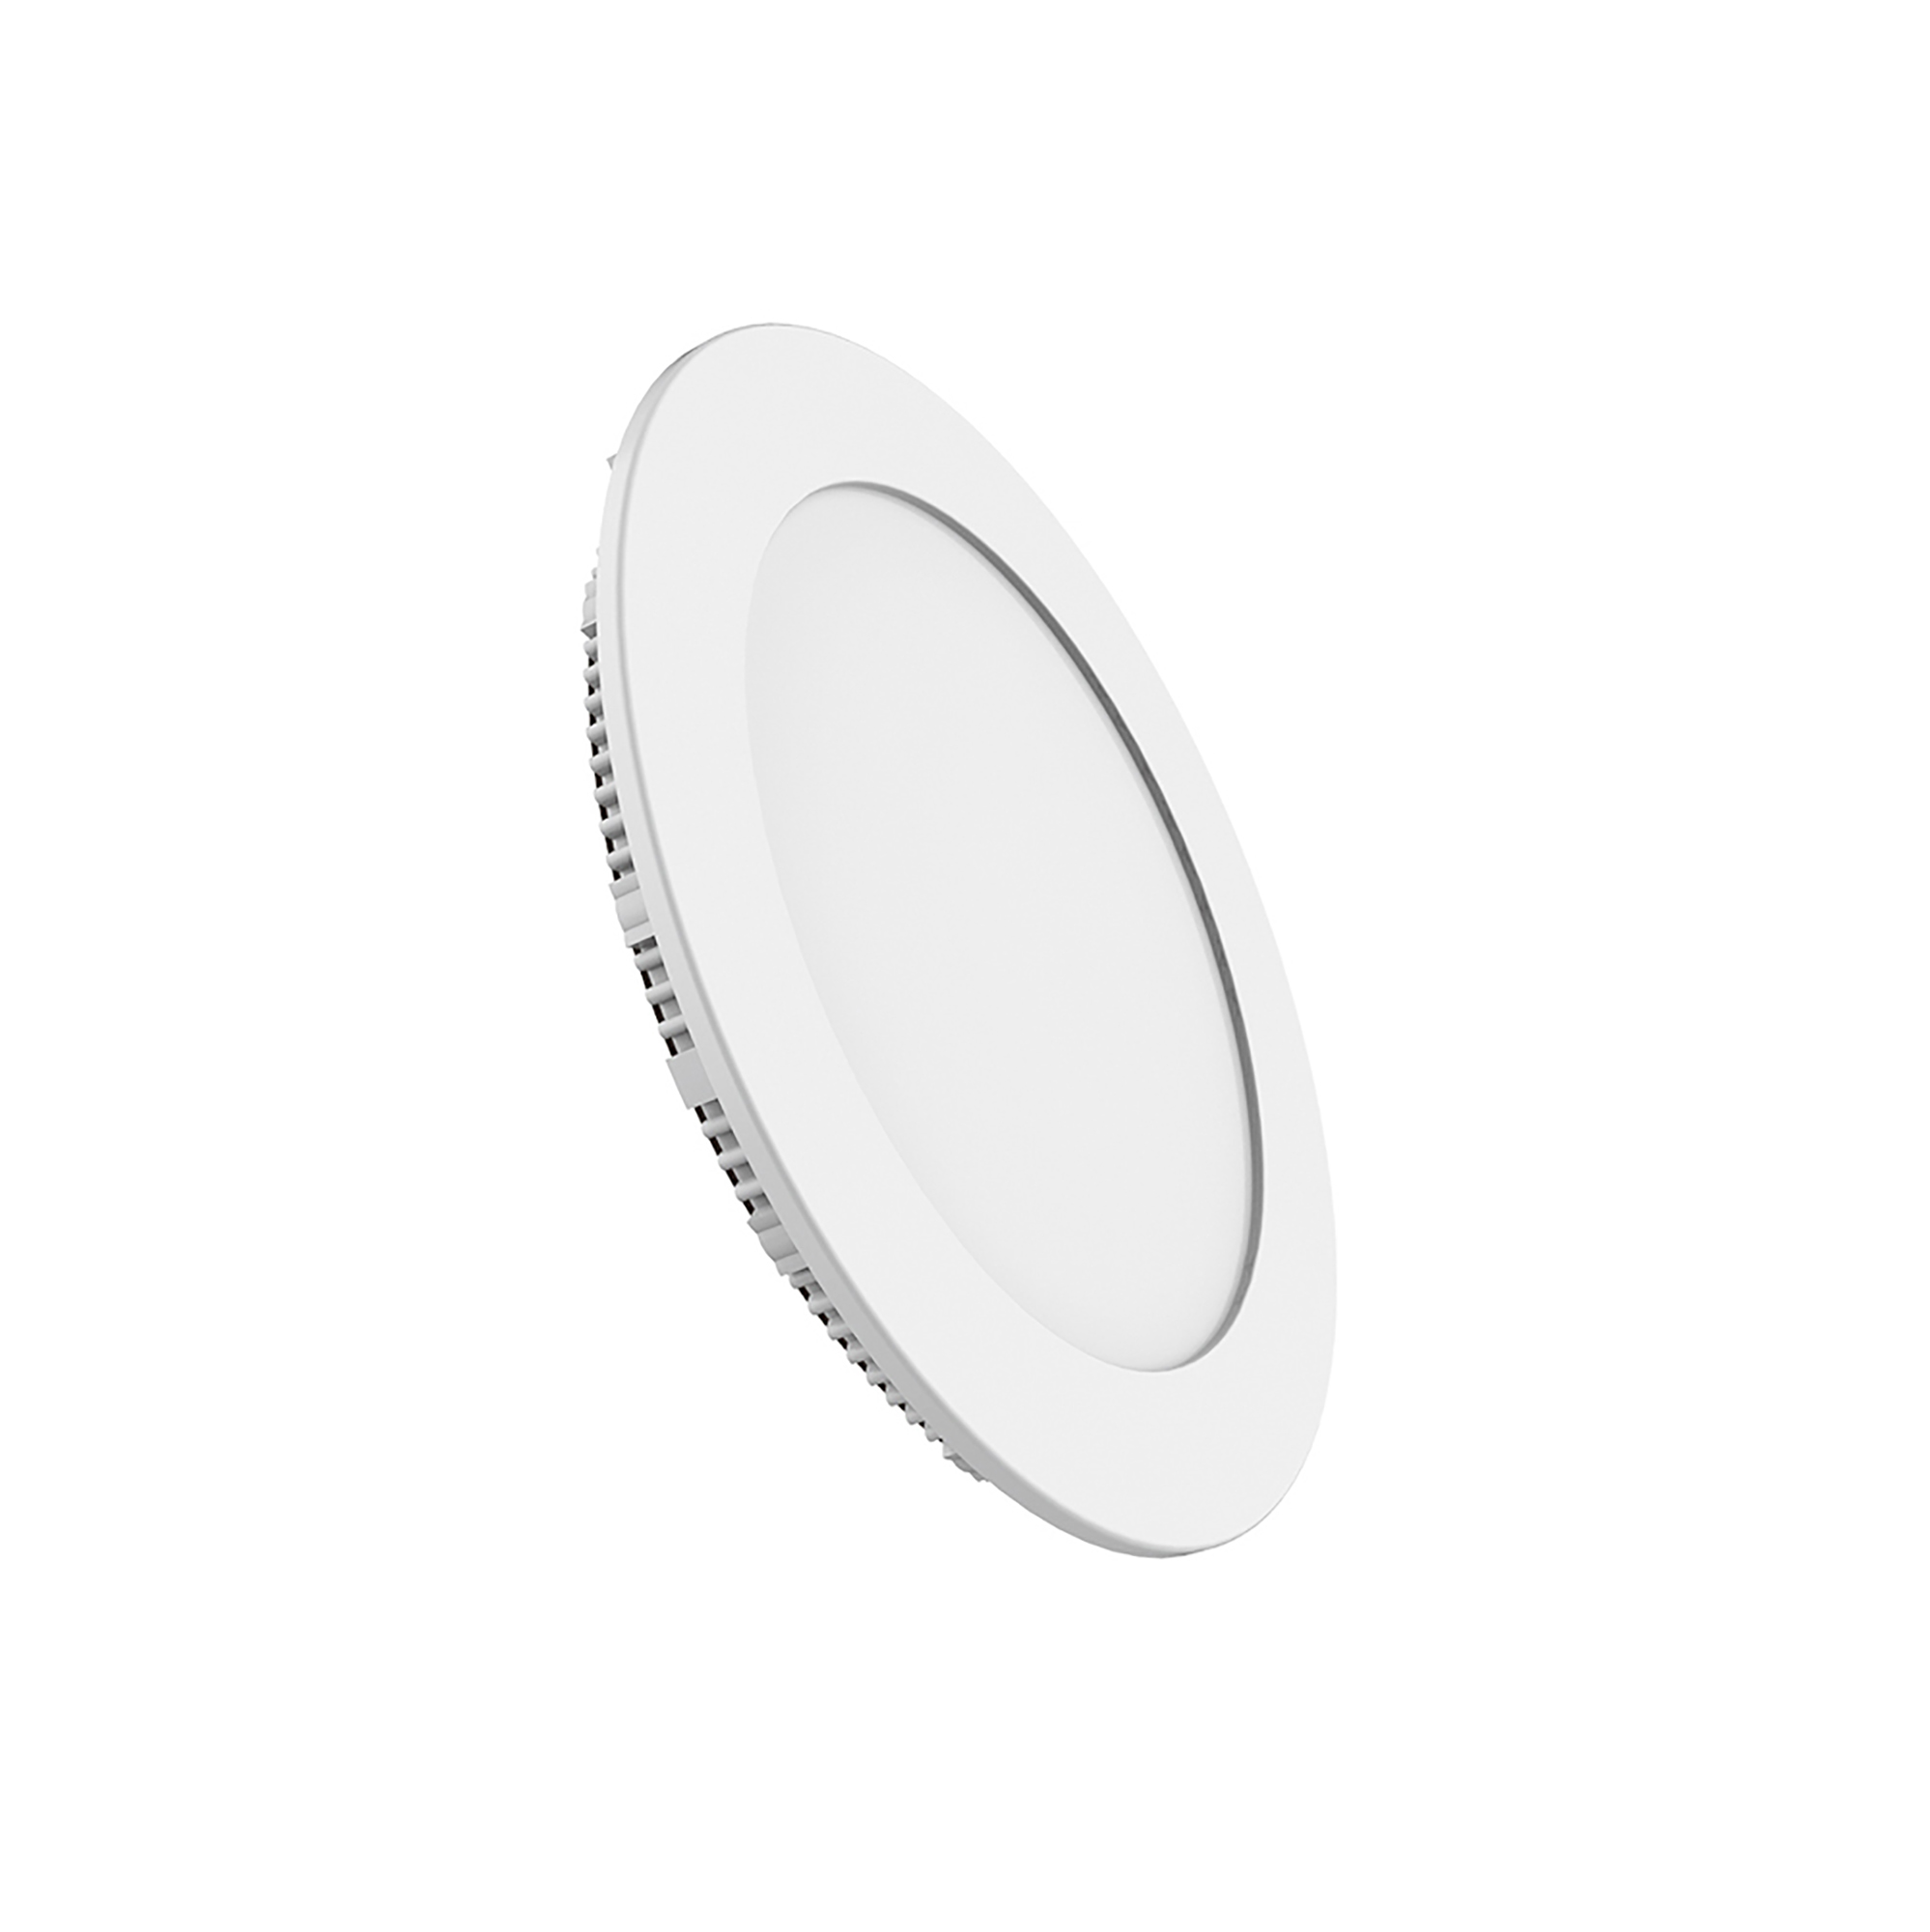 2061220010  Intego R Supervision Slim Recessed Round 170mm (6") 12W; 4000K; 120°; Cut-Out 150mm